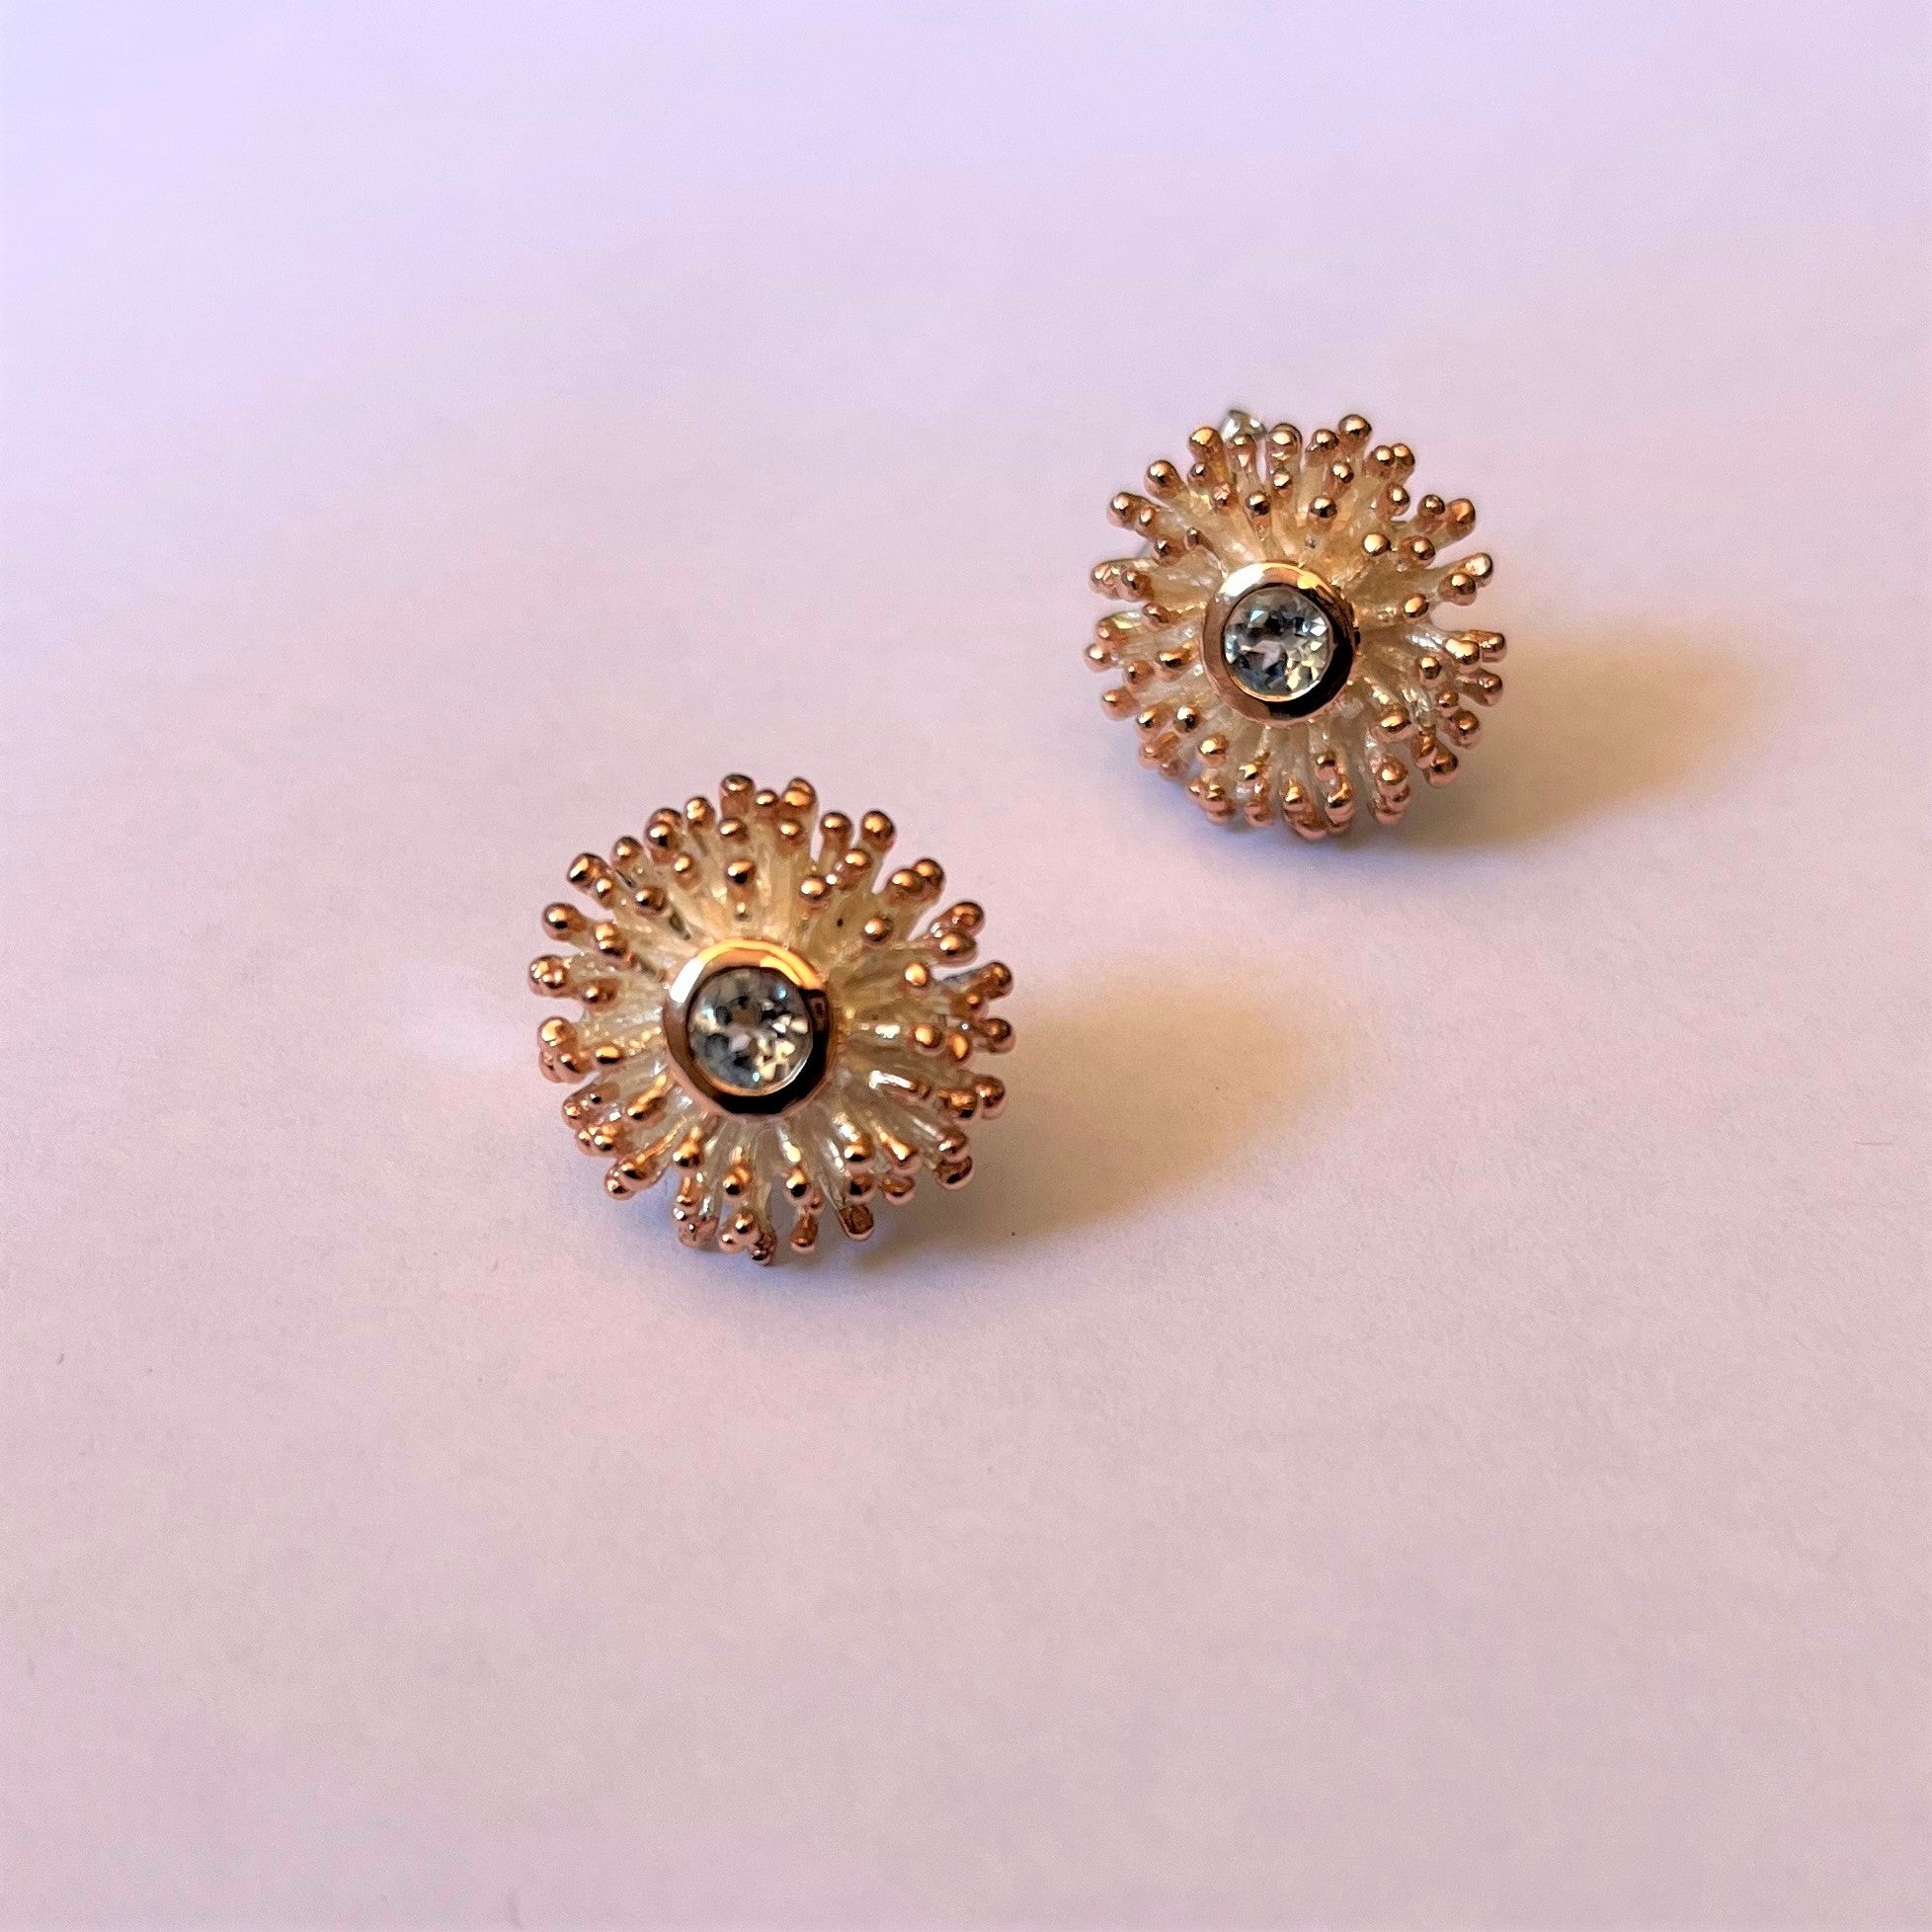 Keiko Uno - 'Anemone' Large Studs with Blue Topaz and Rose Gold Accents (kun101)